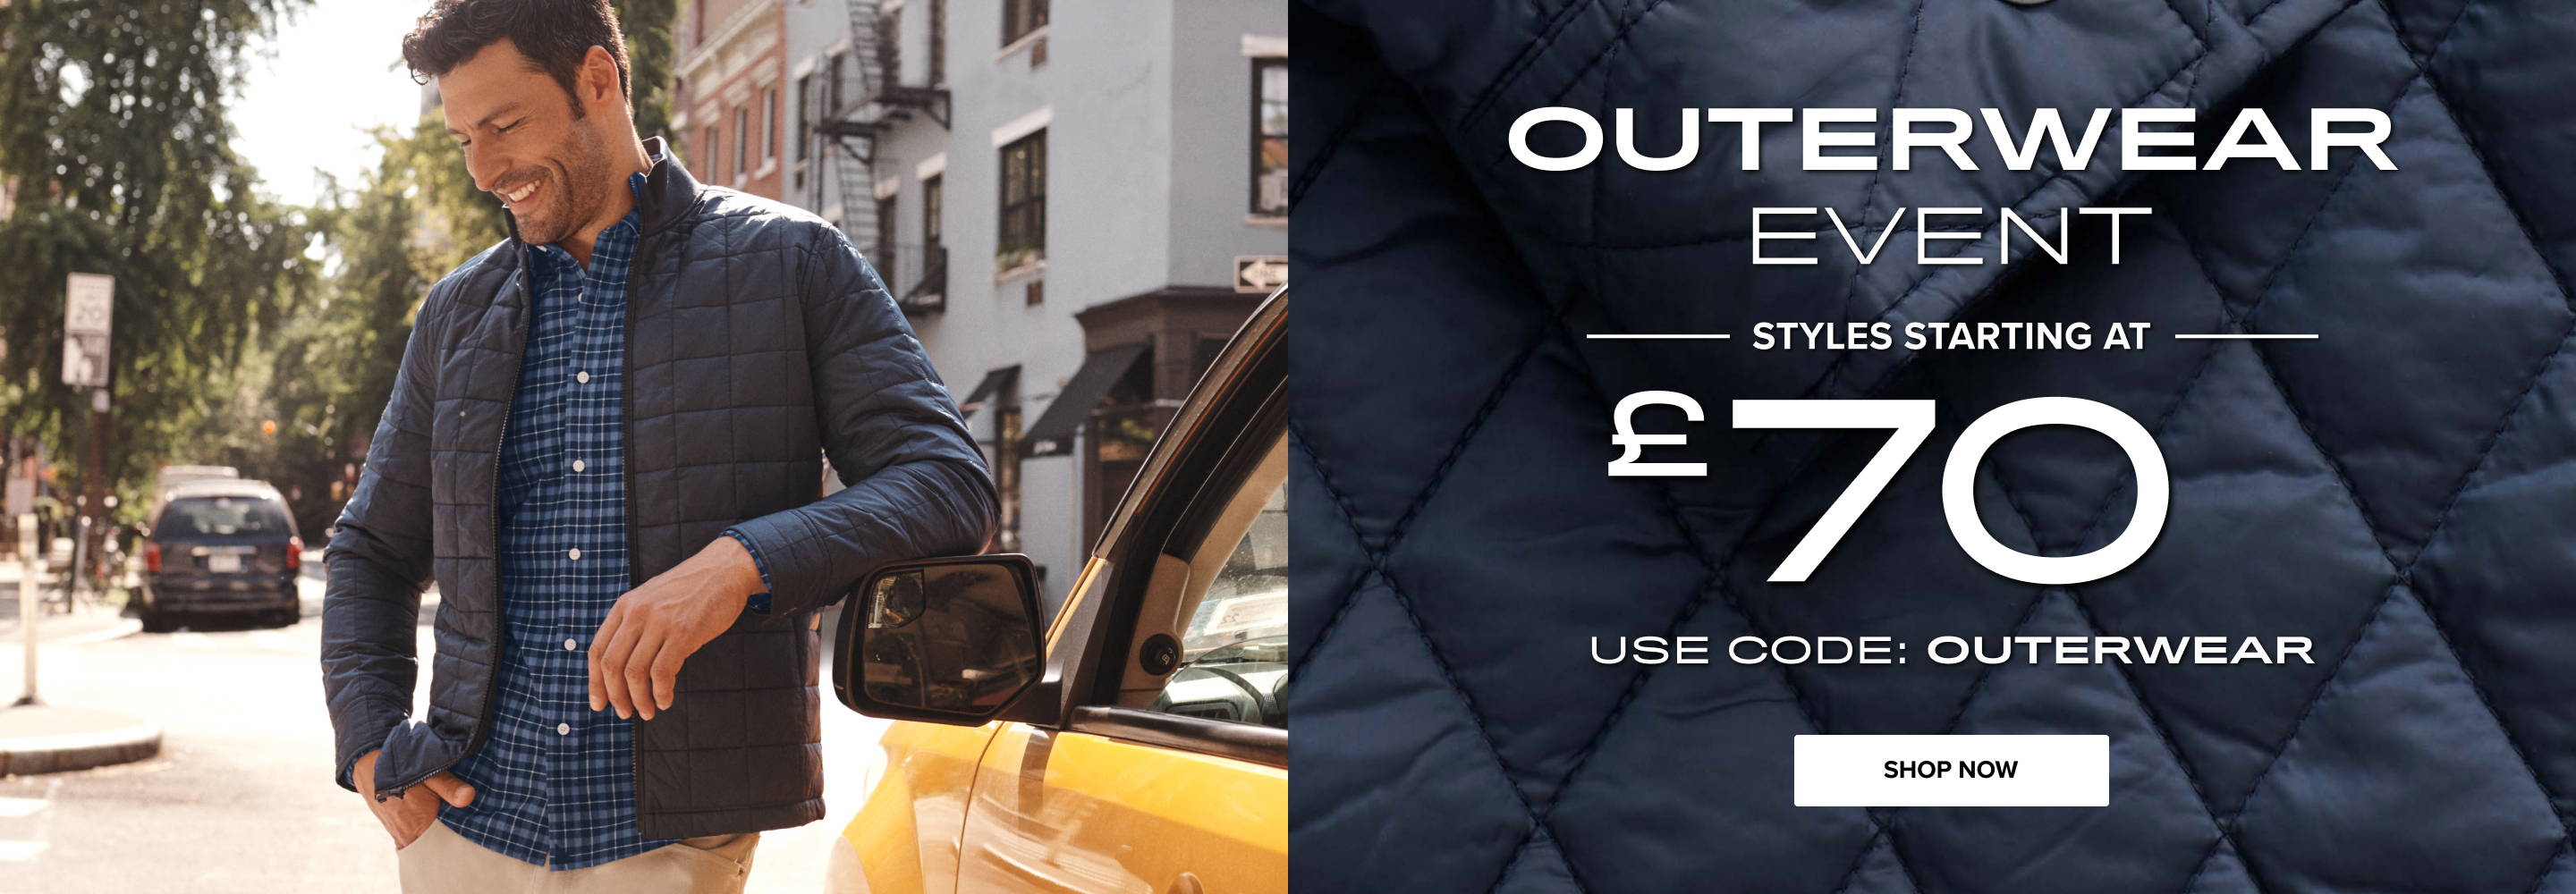 Outerwear event. Styles starting at £70. Use code OUTERWEAR